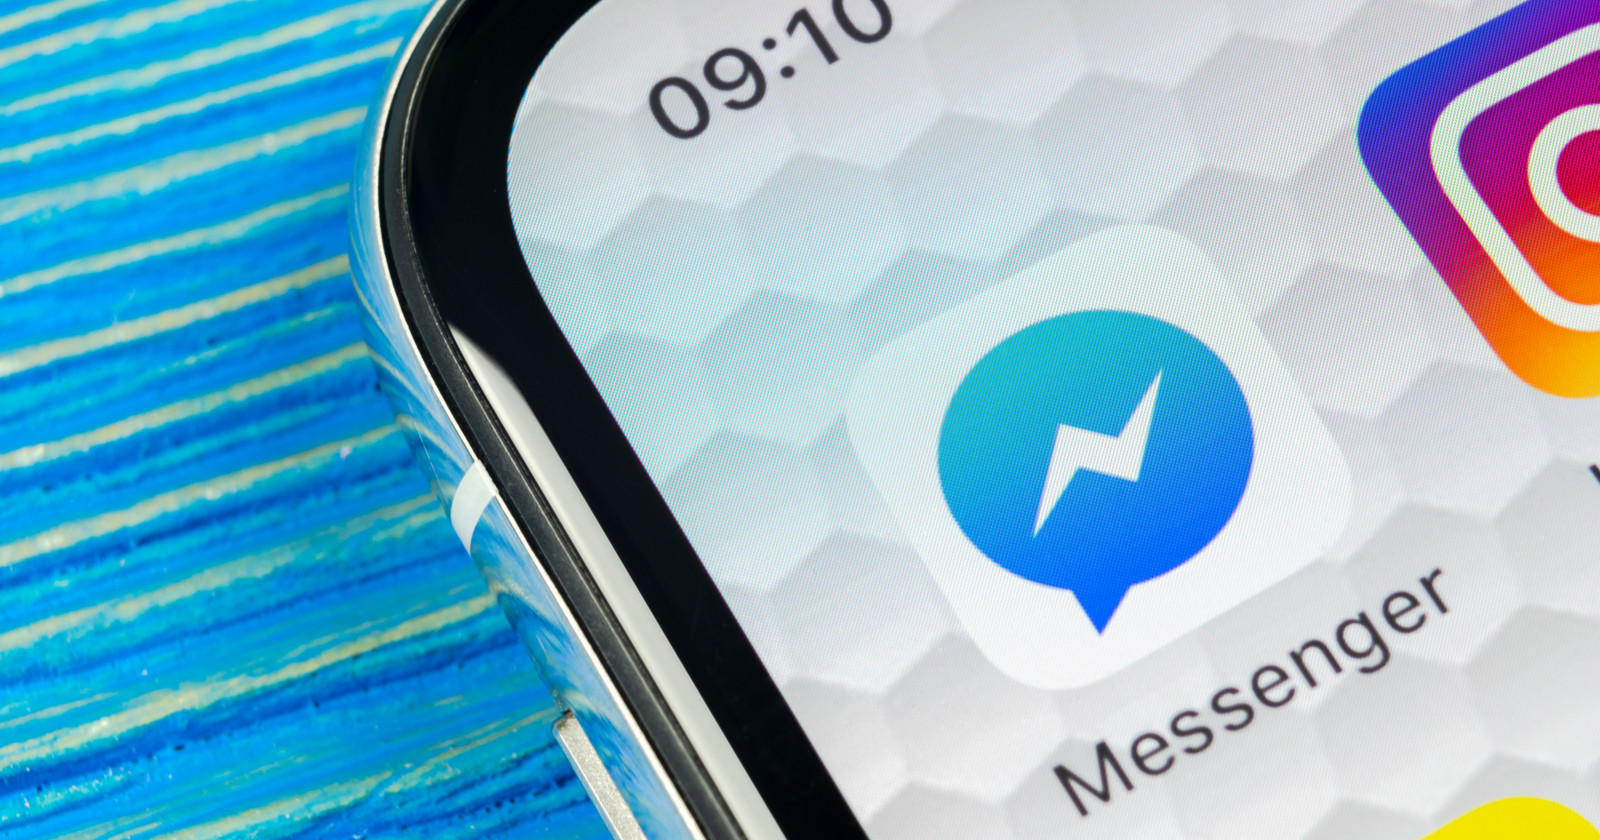 How the Newest Developments for Facebook Messenger Will Impact Businesses